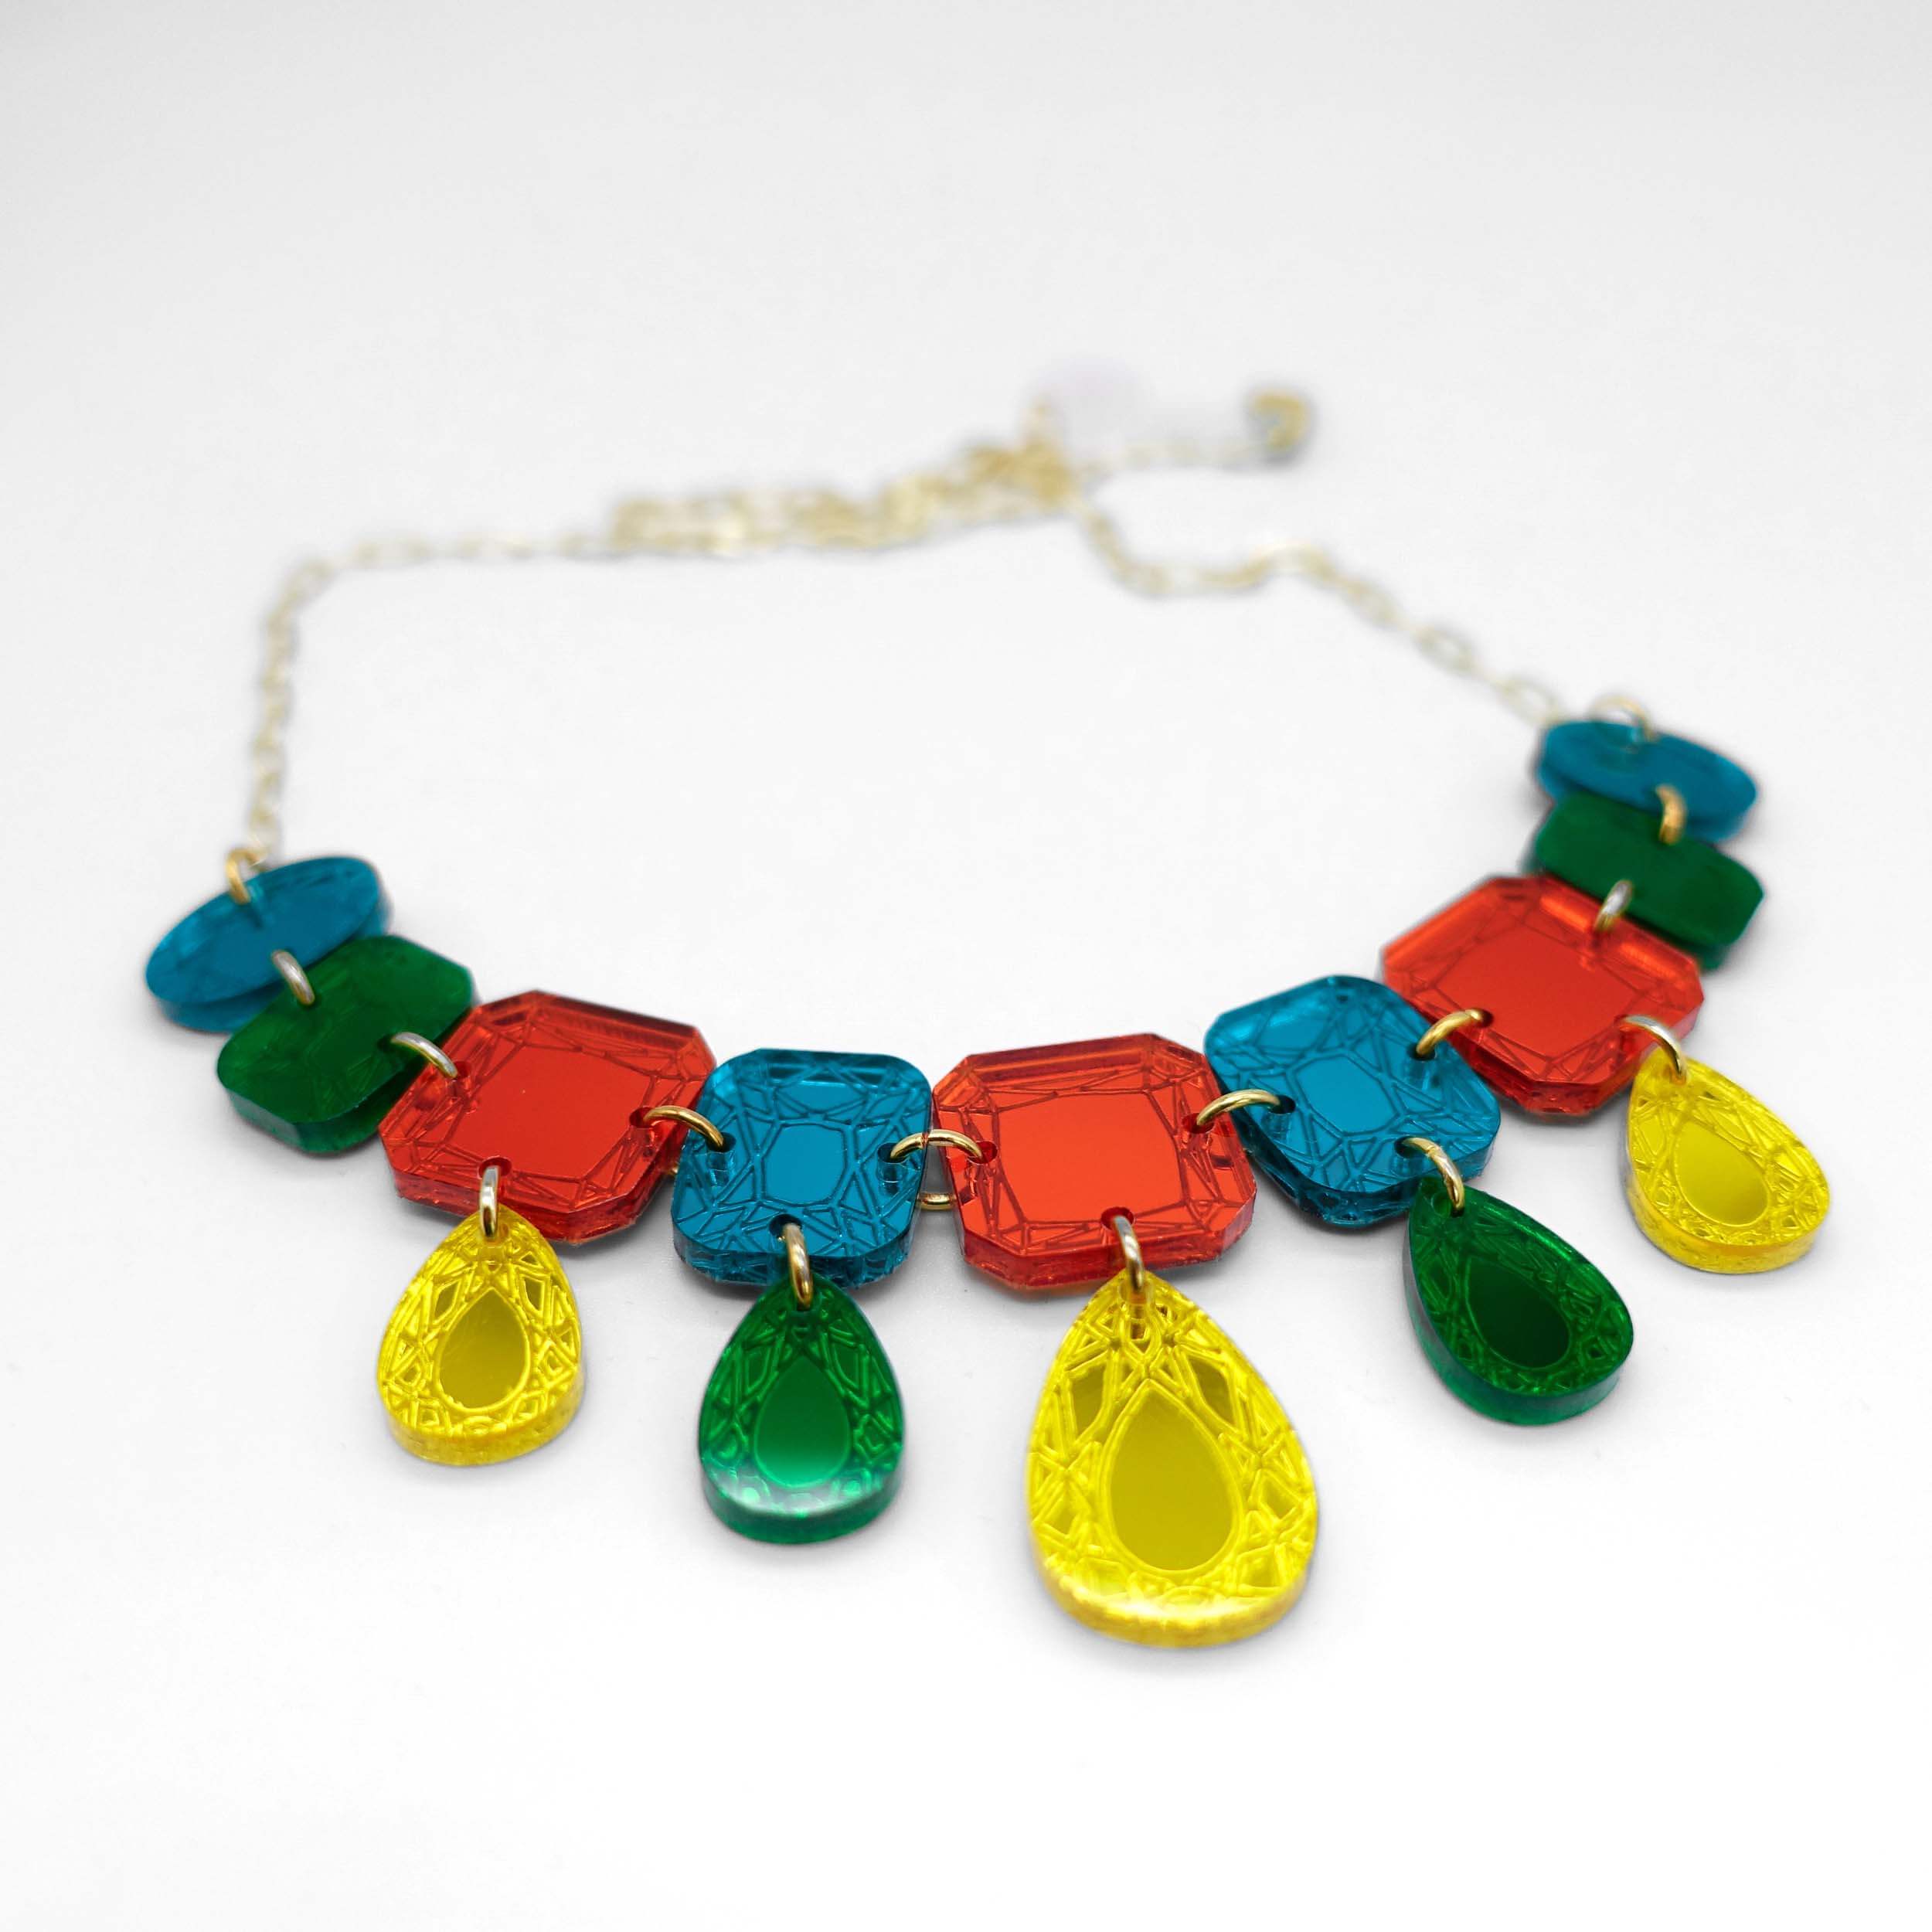 Austerity jewels necklace in flame mambo colours, designed by Sarah Day for Wear and Resist. £2 goes to Women for Refugee Women. Bling for Brexit Britain! Recession chic. 